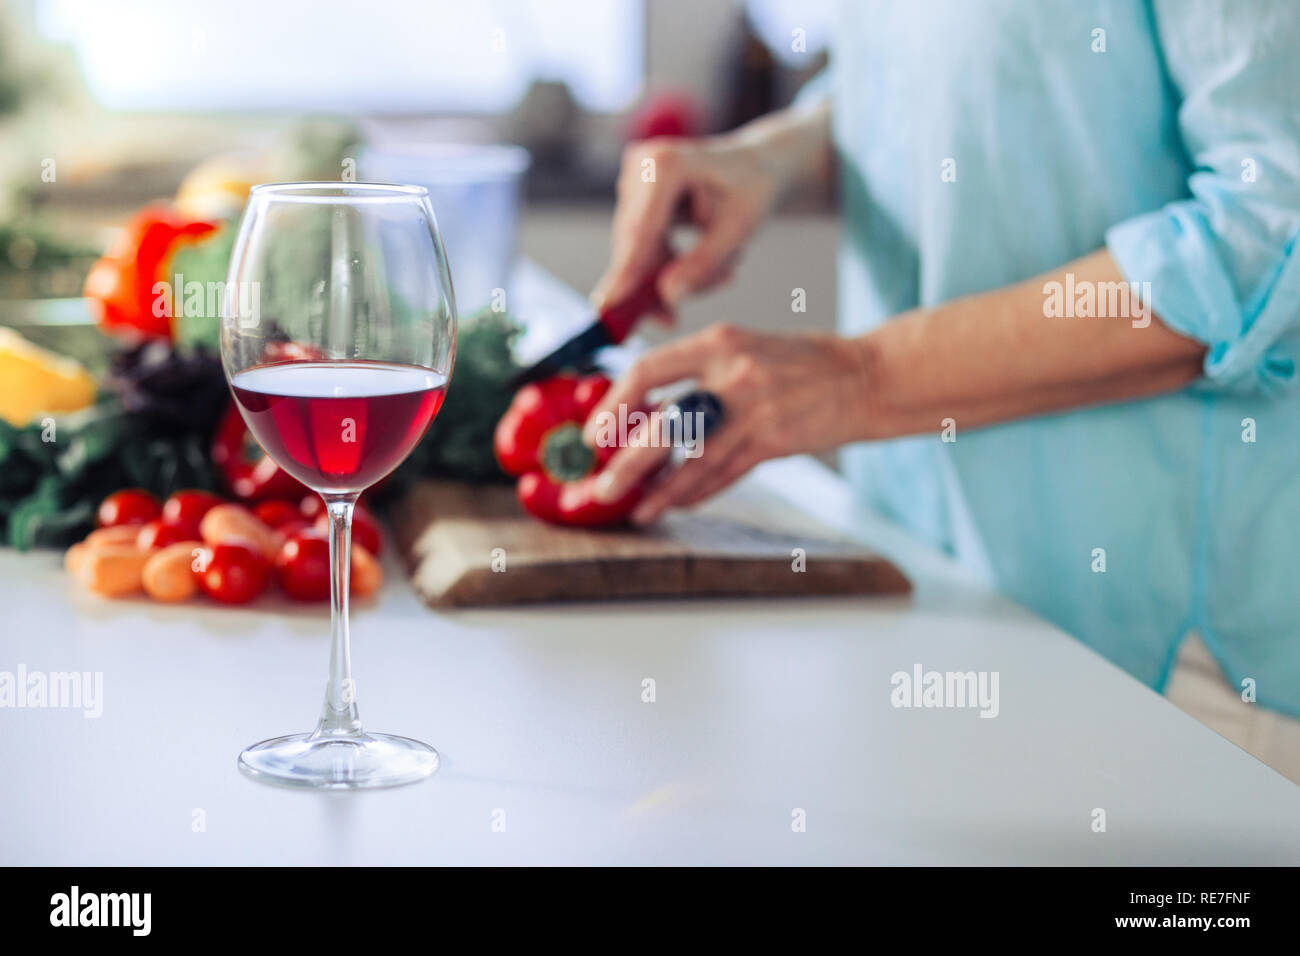 Glass with dry red wine standing on the table Stock Photo